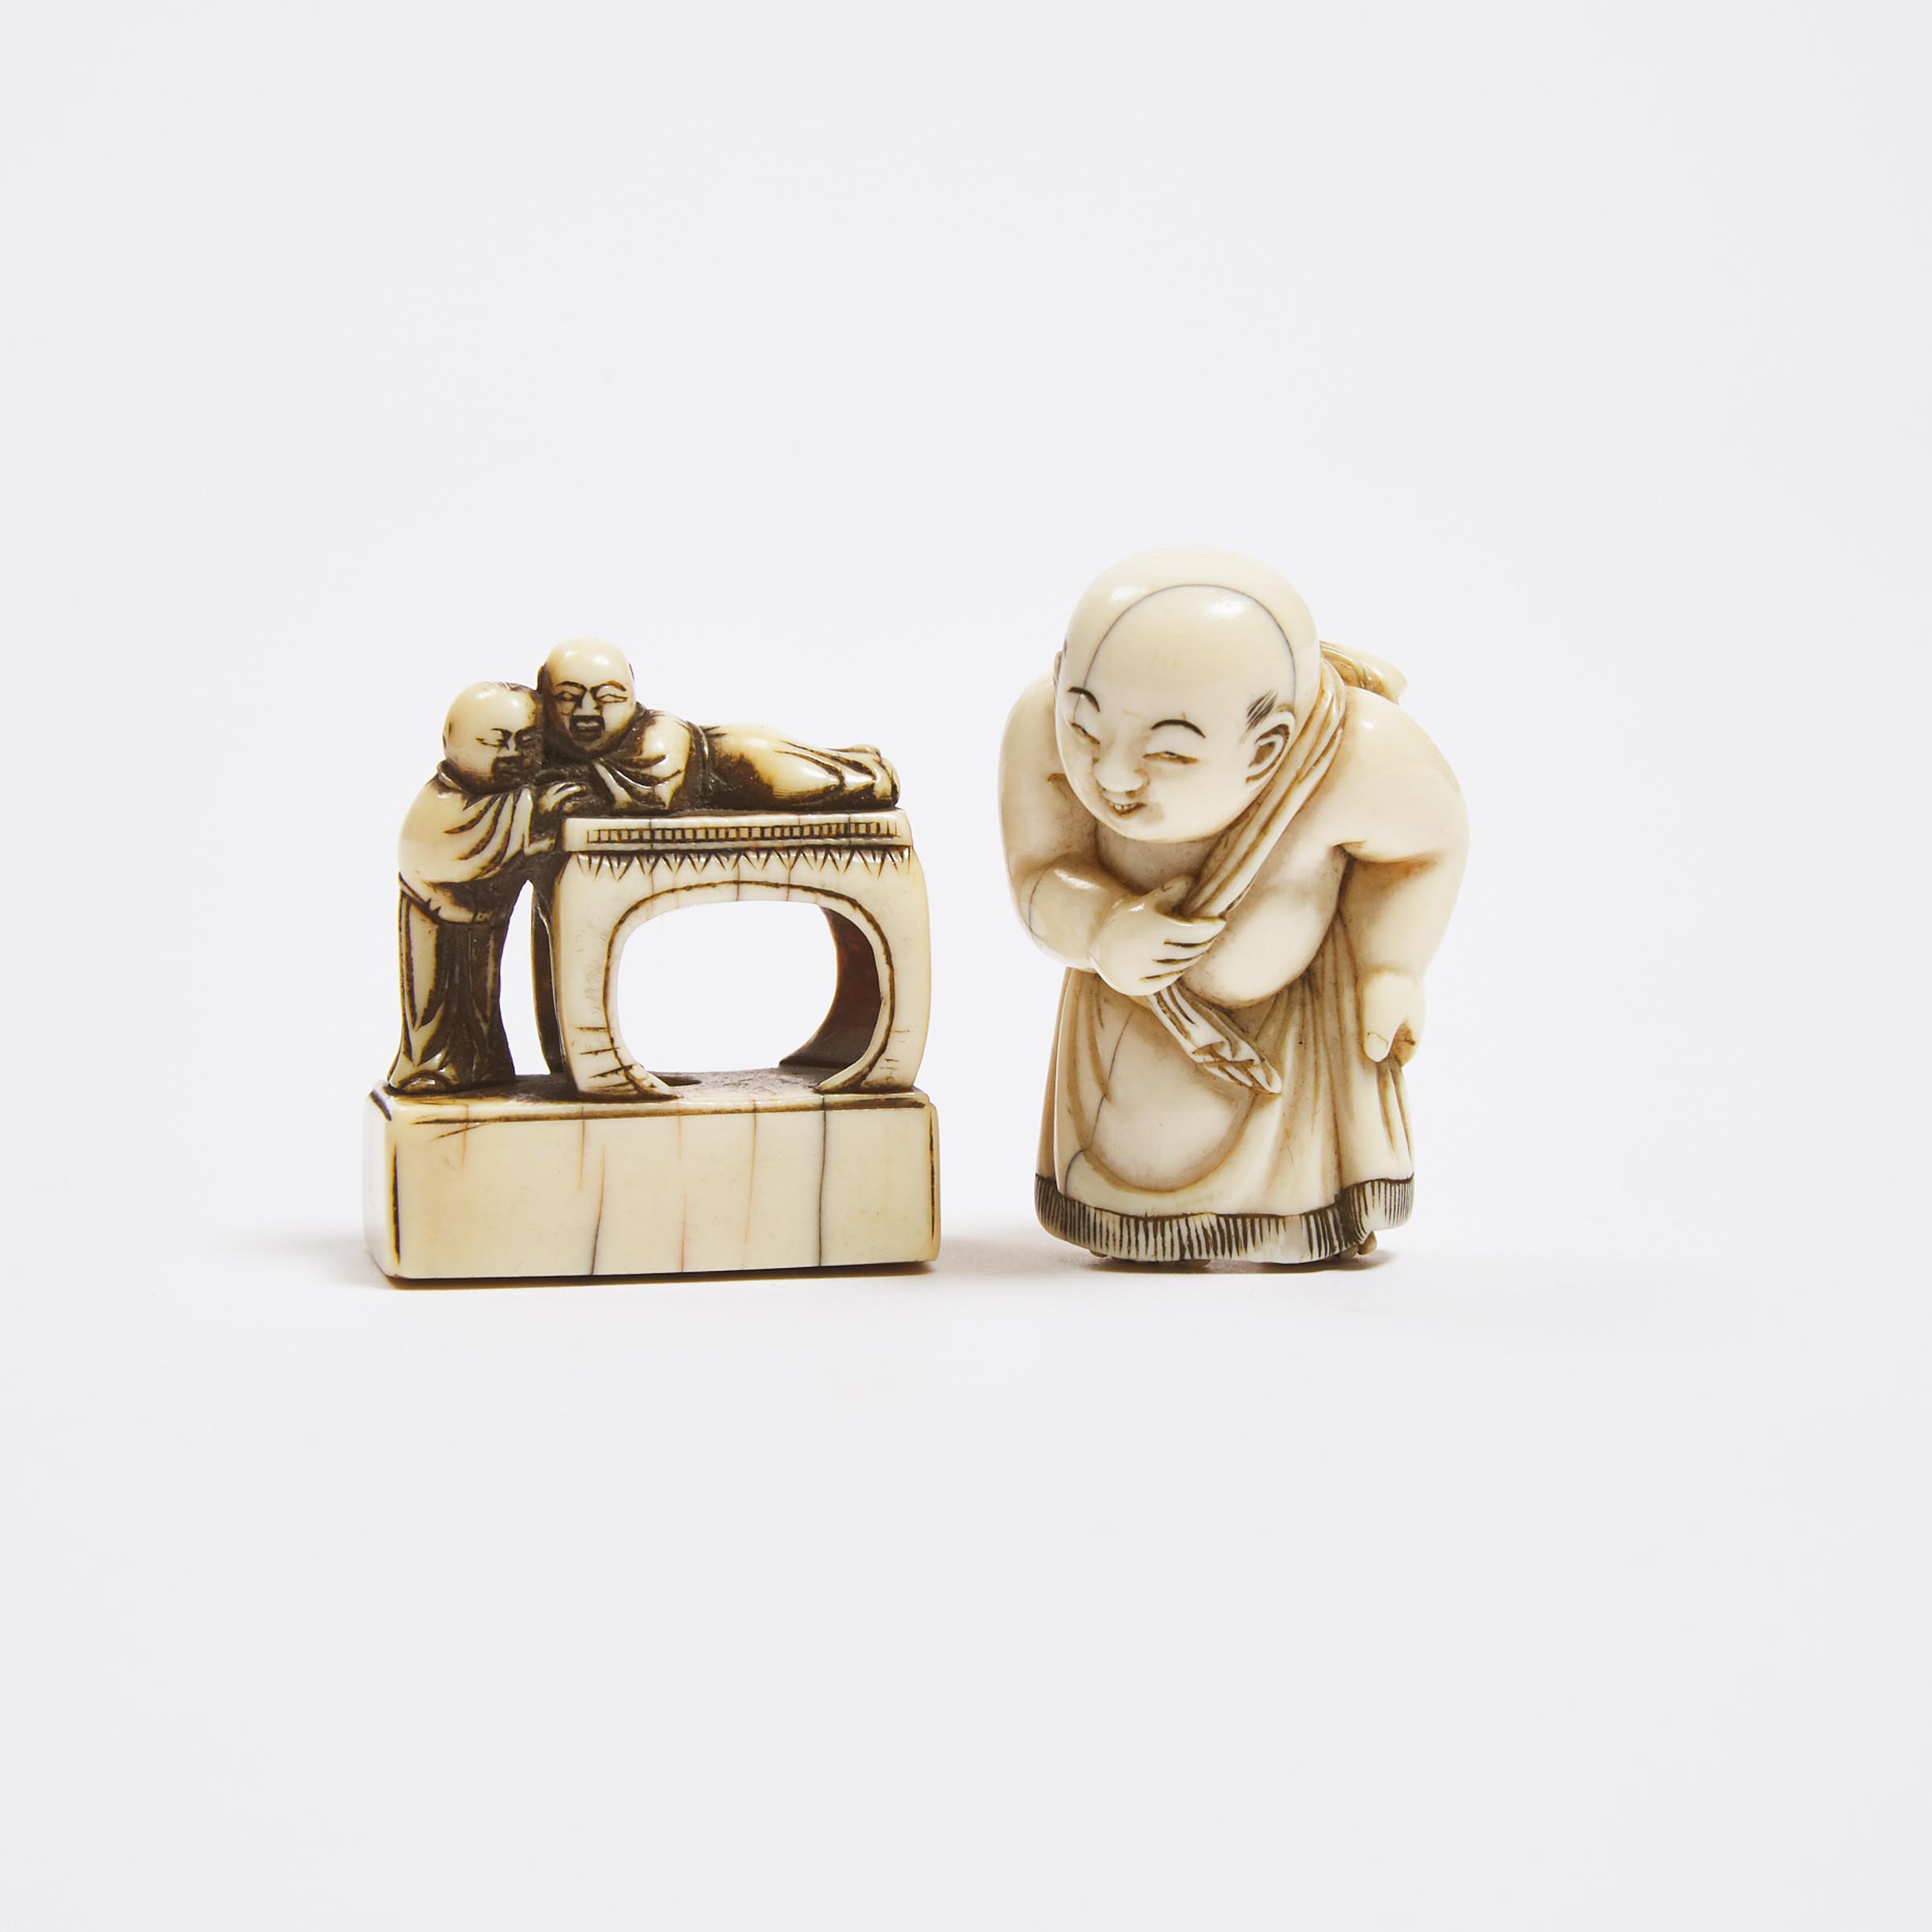 An Ivory Netsuke of a Child Sumo Wrestler, Together With a Seal-Form Netsuke of Two Children, 18th/19th Century